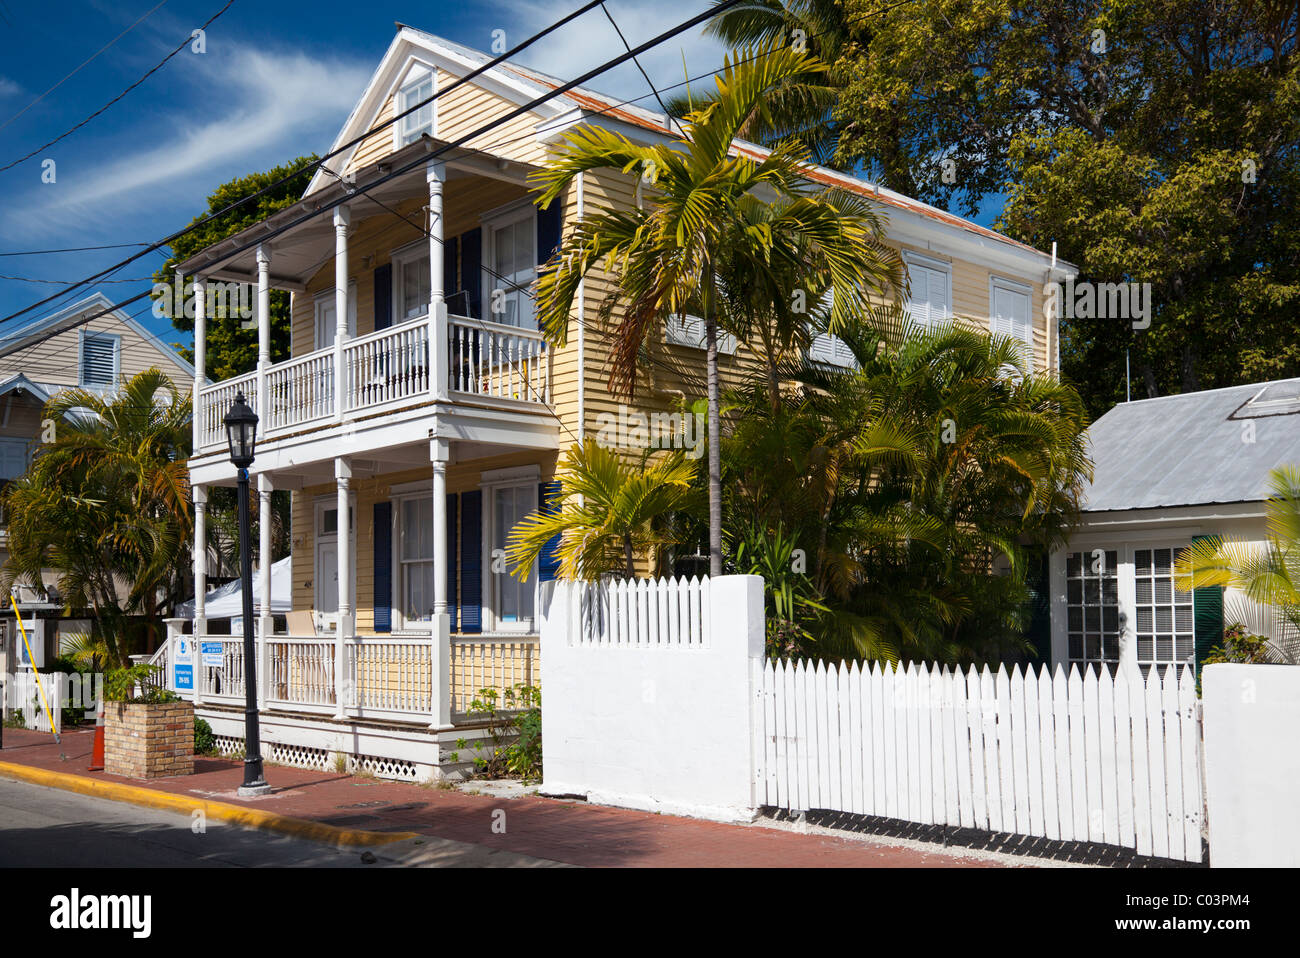 Old traditional wooden house in Key West, Florida USA Stock Photo